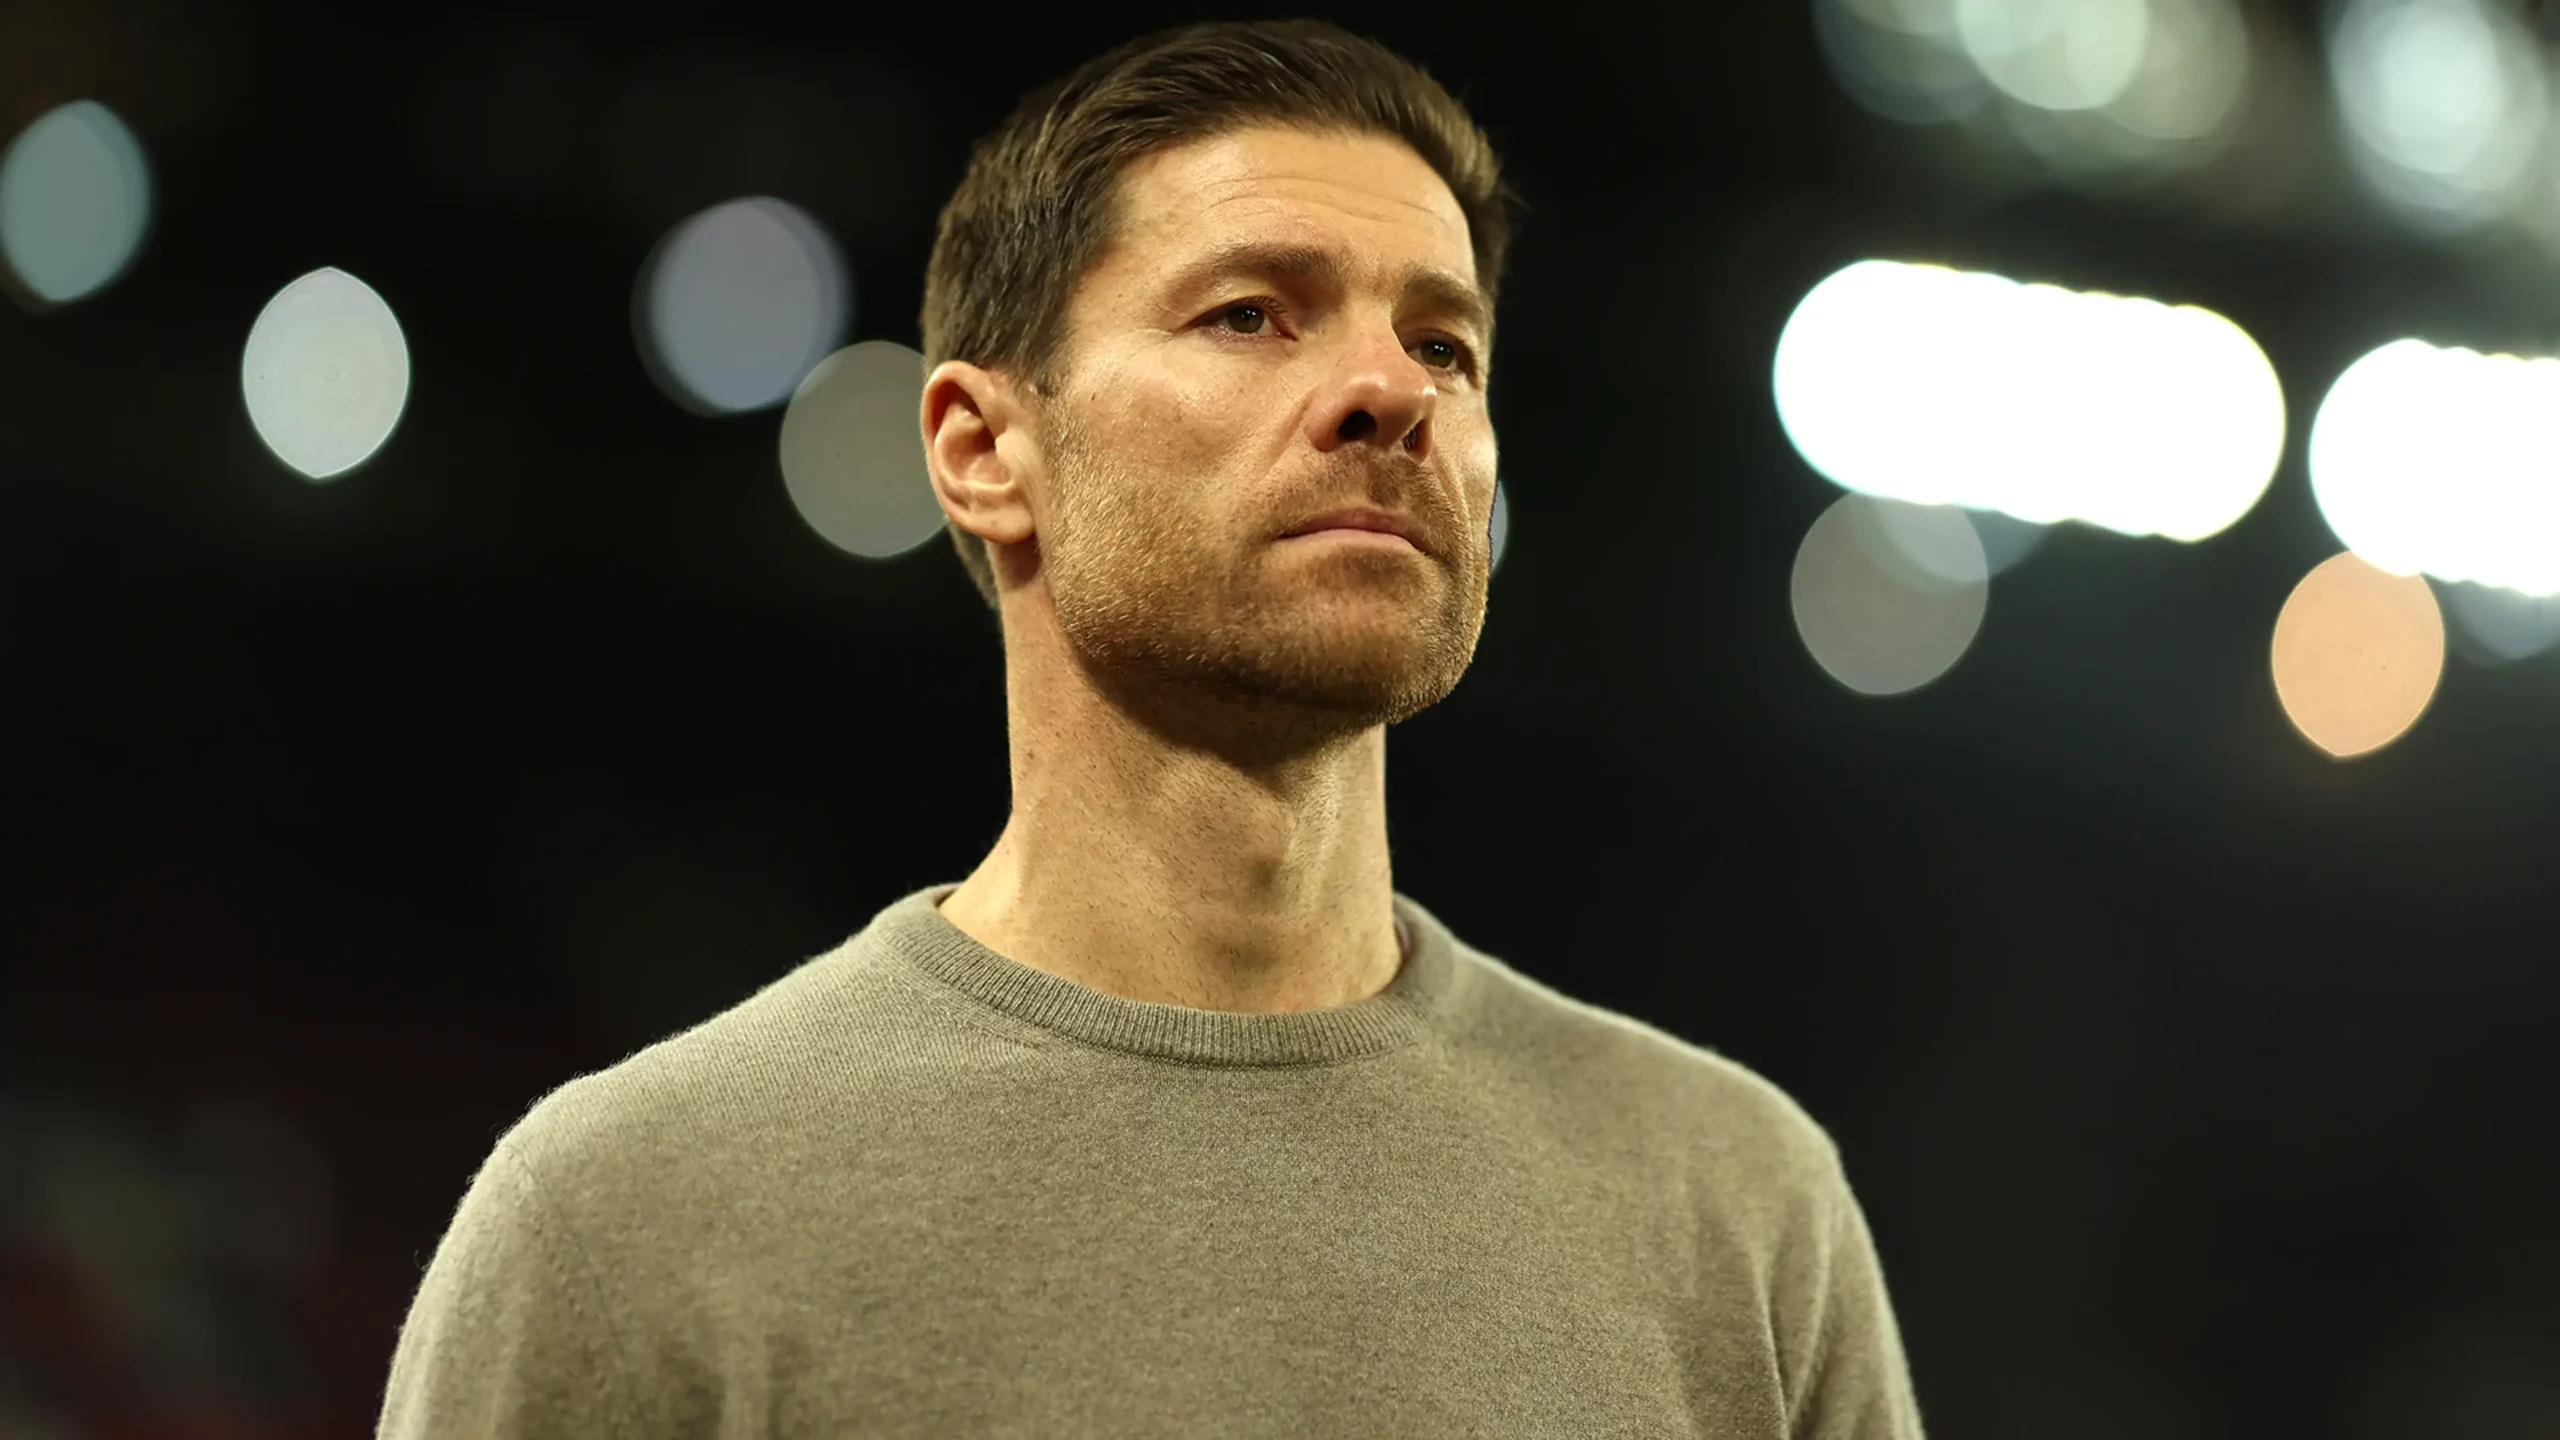 I will not miss them - Xabi Alonso on his African players who will be leaving for AFCON